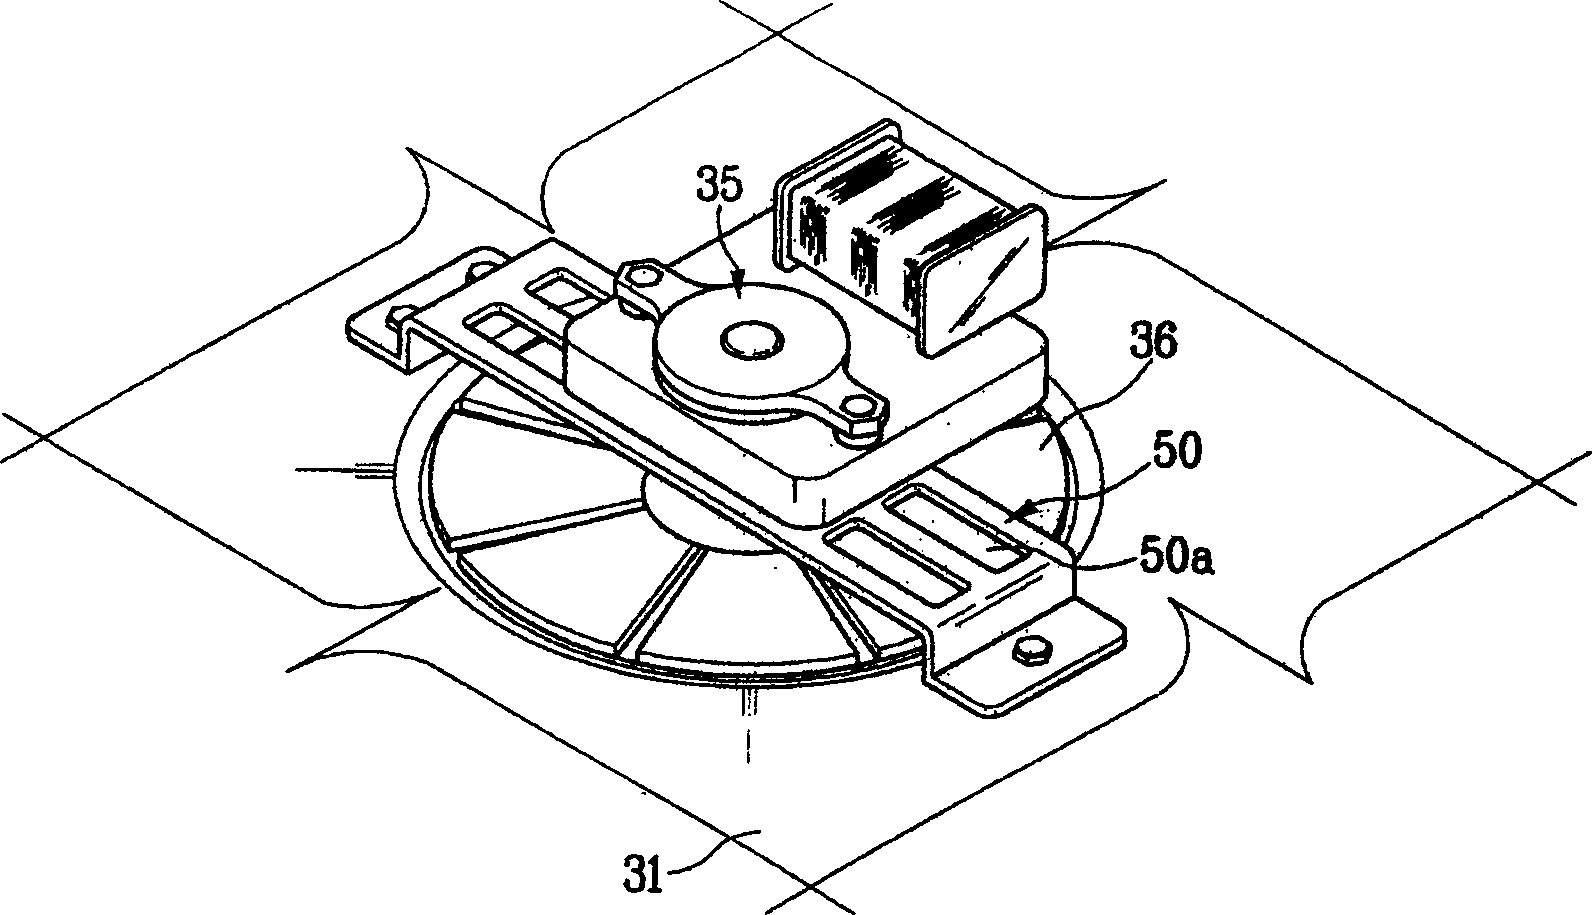 Convection portion structure of convection electronic microwave oven